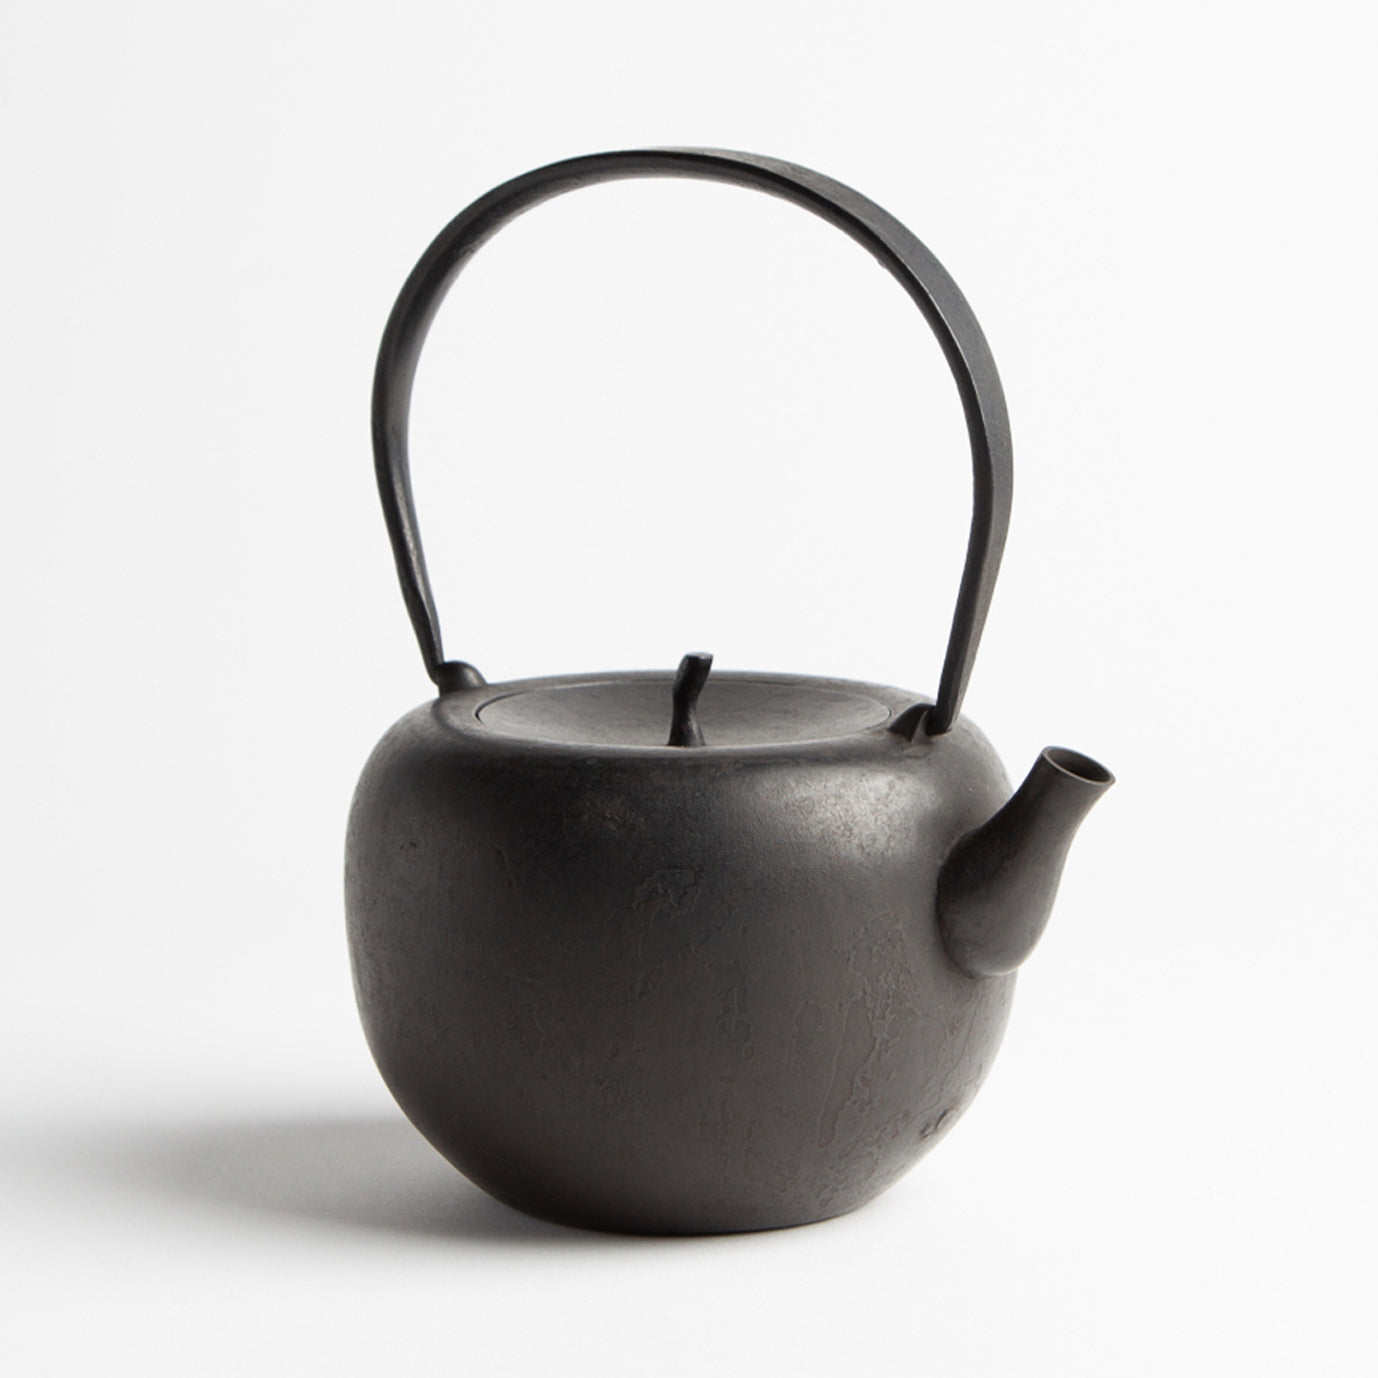 A black cast iron kettle on a white backround. The kettle is round with a flattish top and a lid a bit like the top of an apple. The kettle has a long handle for holding on top. 